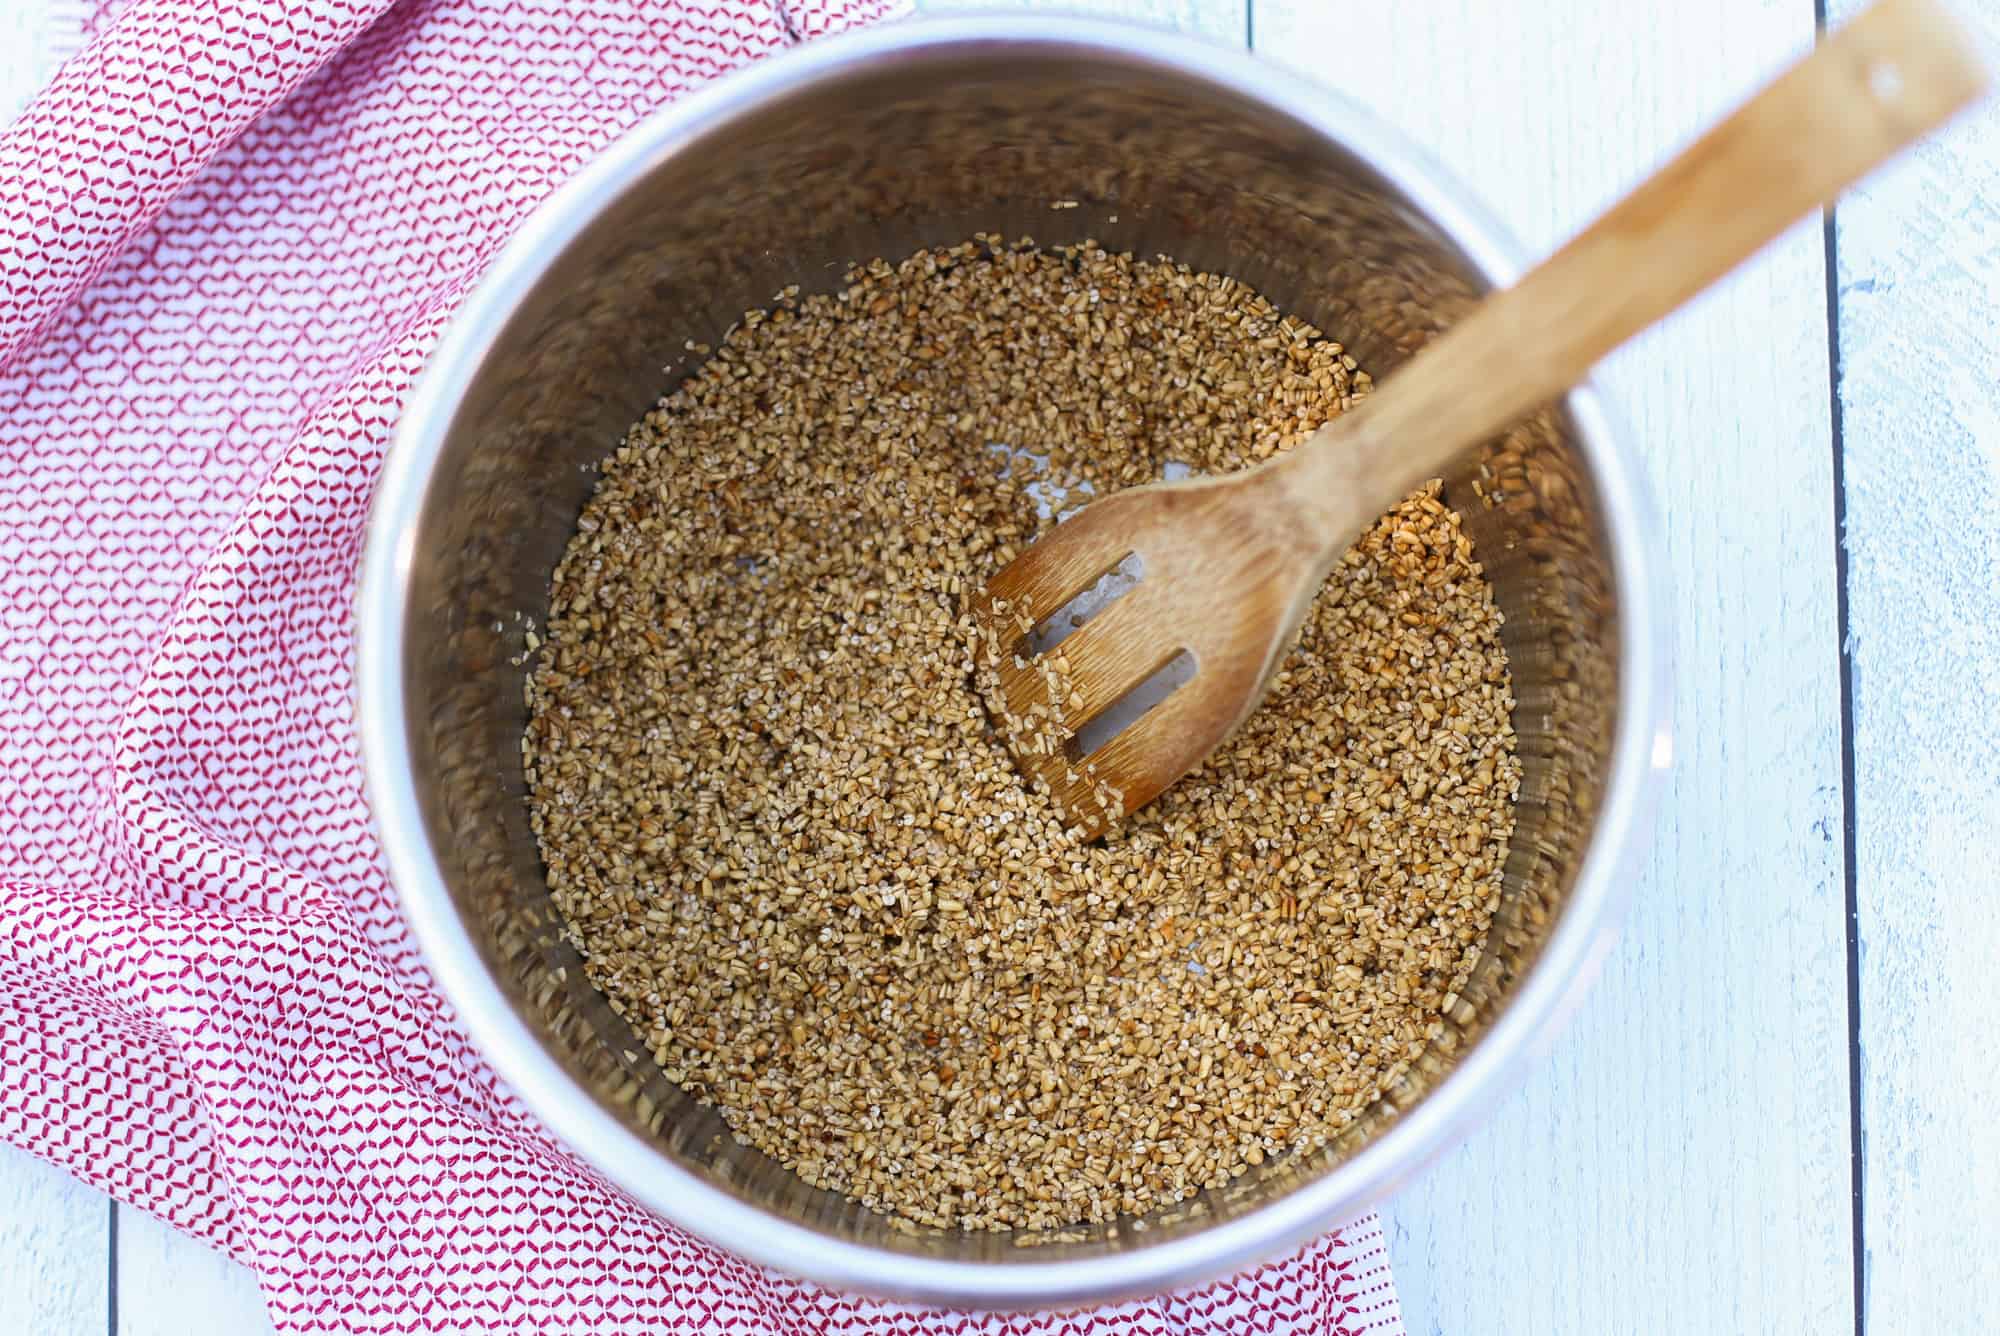 Toasted steel cut oats in an instant pot with a wooden spoon stirring.